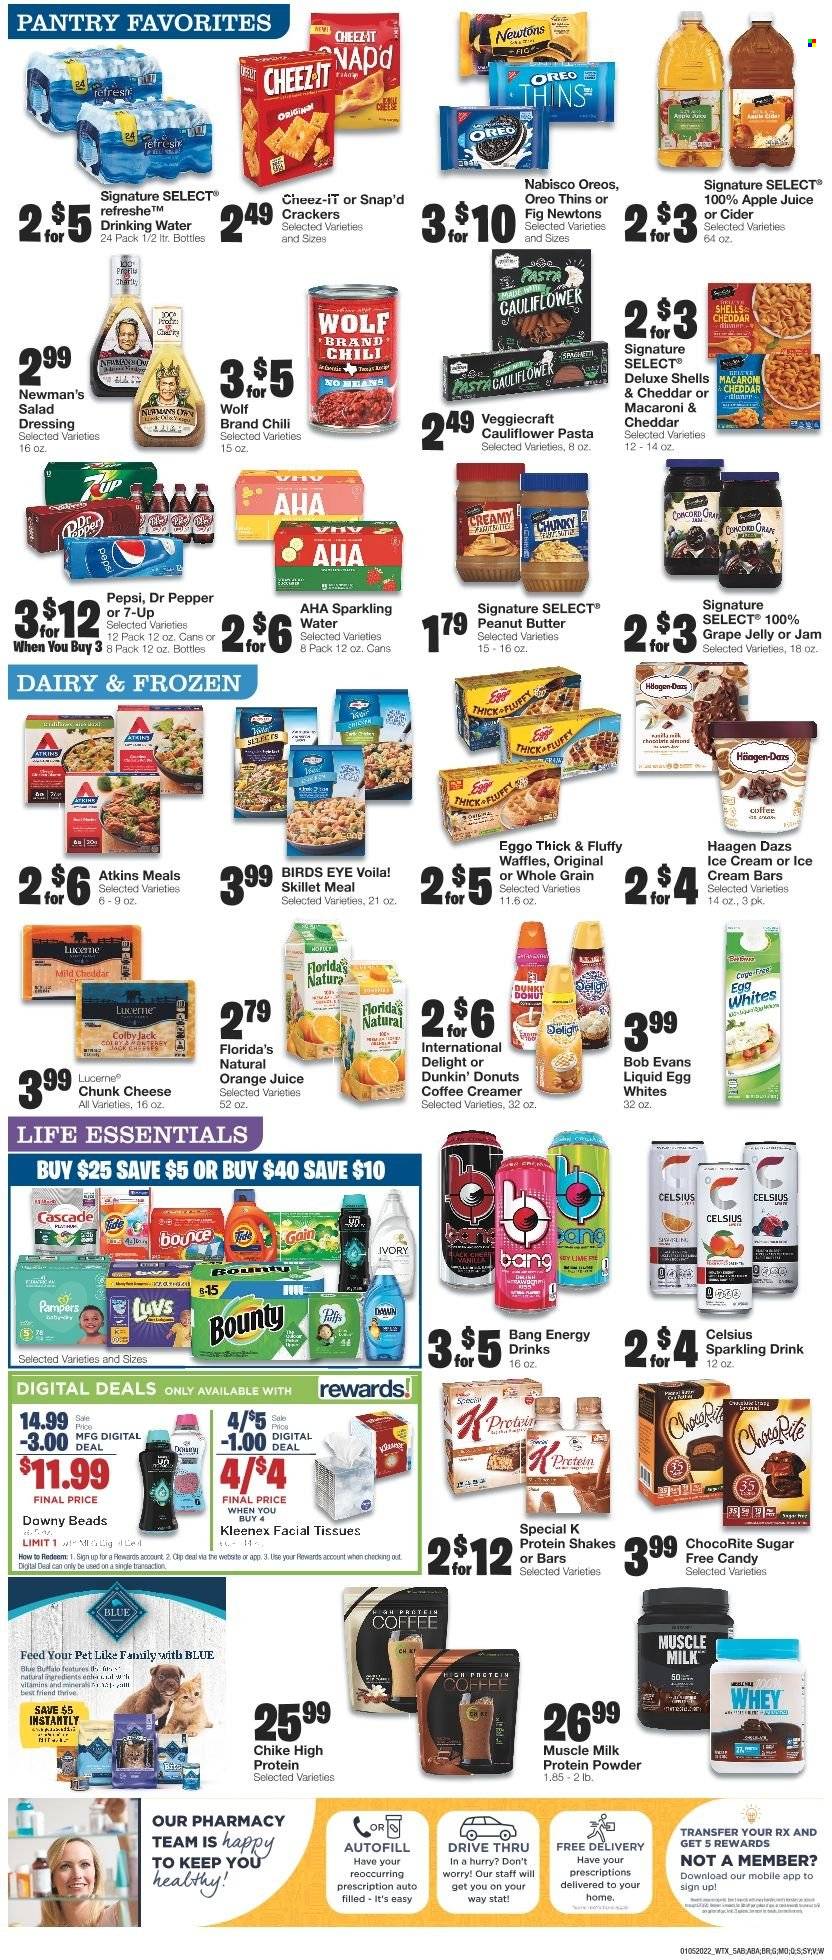 thumbnail - United Supermarkets Flyer - 01/05/2022 - 01/11/2022 - Sales products - waffles, Dunkin' Donuts, Bob Evans, macaroni, pasta, Bird's Eye, Colby cheese, chunk cheese, Oreo, protein drink, shake, muscle milk, eggs, creamer, ice cream bars, Häagen-Dazs, Bounty, jelly, crackers, Florida's Natural, Thins, Cheez-It, salad dressing, dressing, grape jelly, fruit jam, peanut butter, apple juice, Pepsi, orange juice, juice, energy drink, Dr. Pepper, 7UP, sparkling water, cider, Pampers, Kleenex, tissues, Cascade, Bounce, facial tissues, whey protein. Page 5.